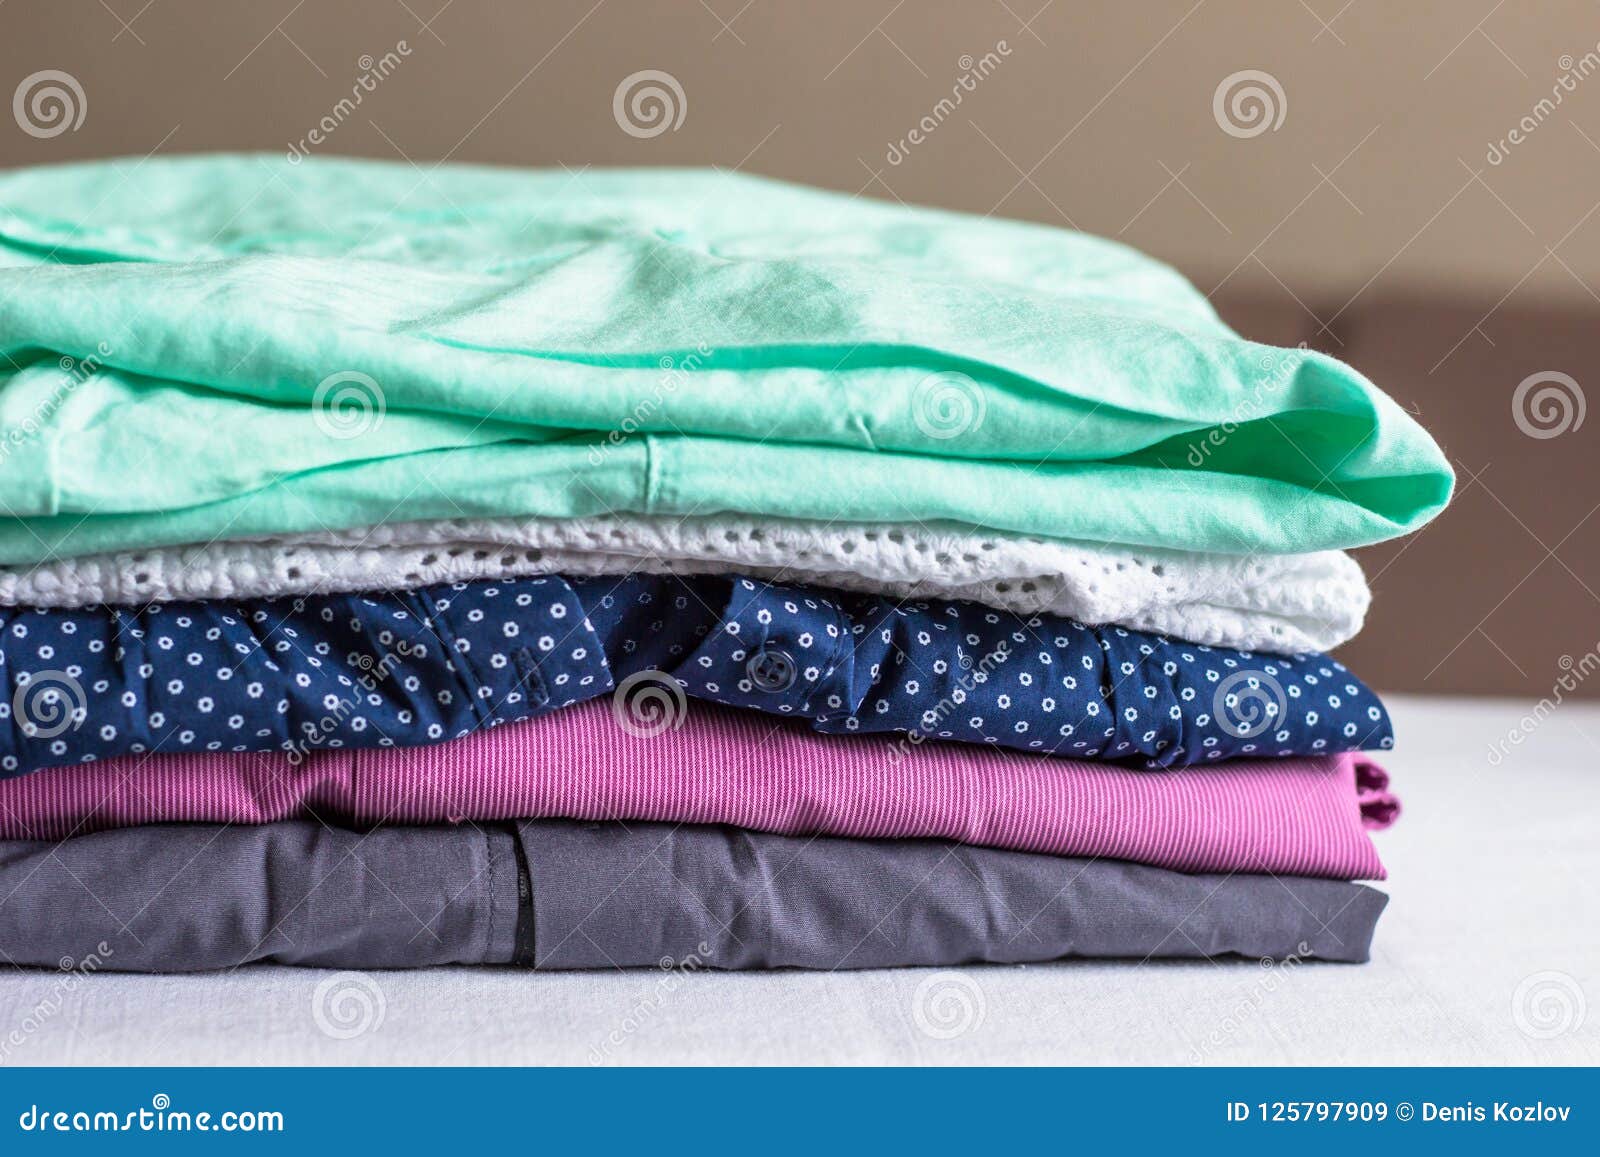 Wrinkled Clothes on the Ironing Board. Stock Image - Image of folded ...